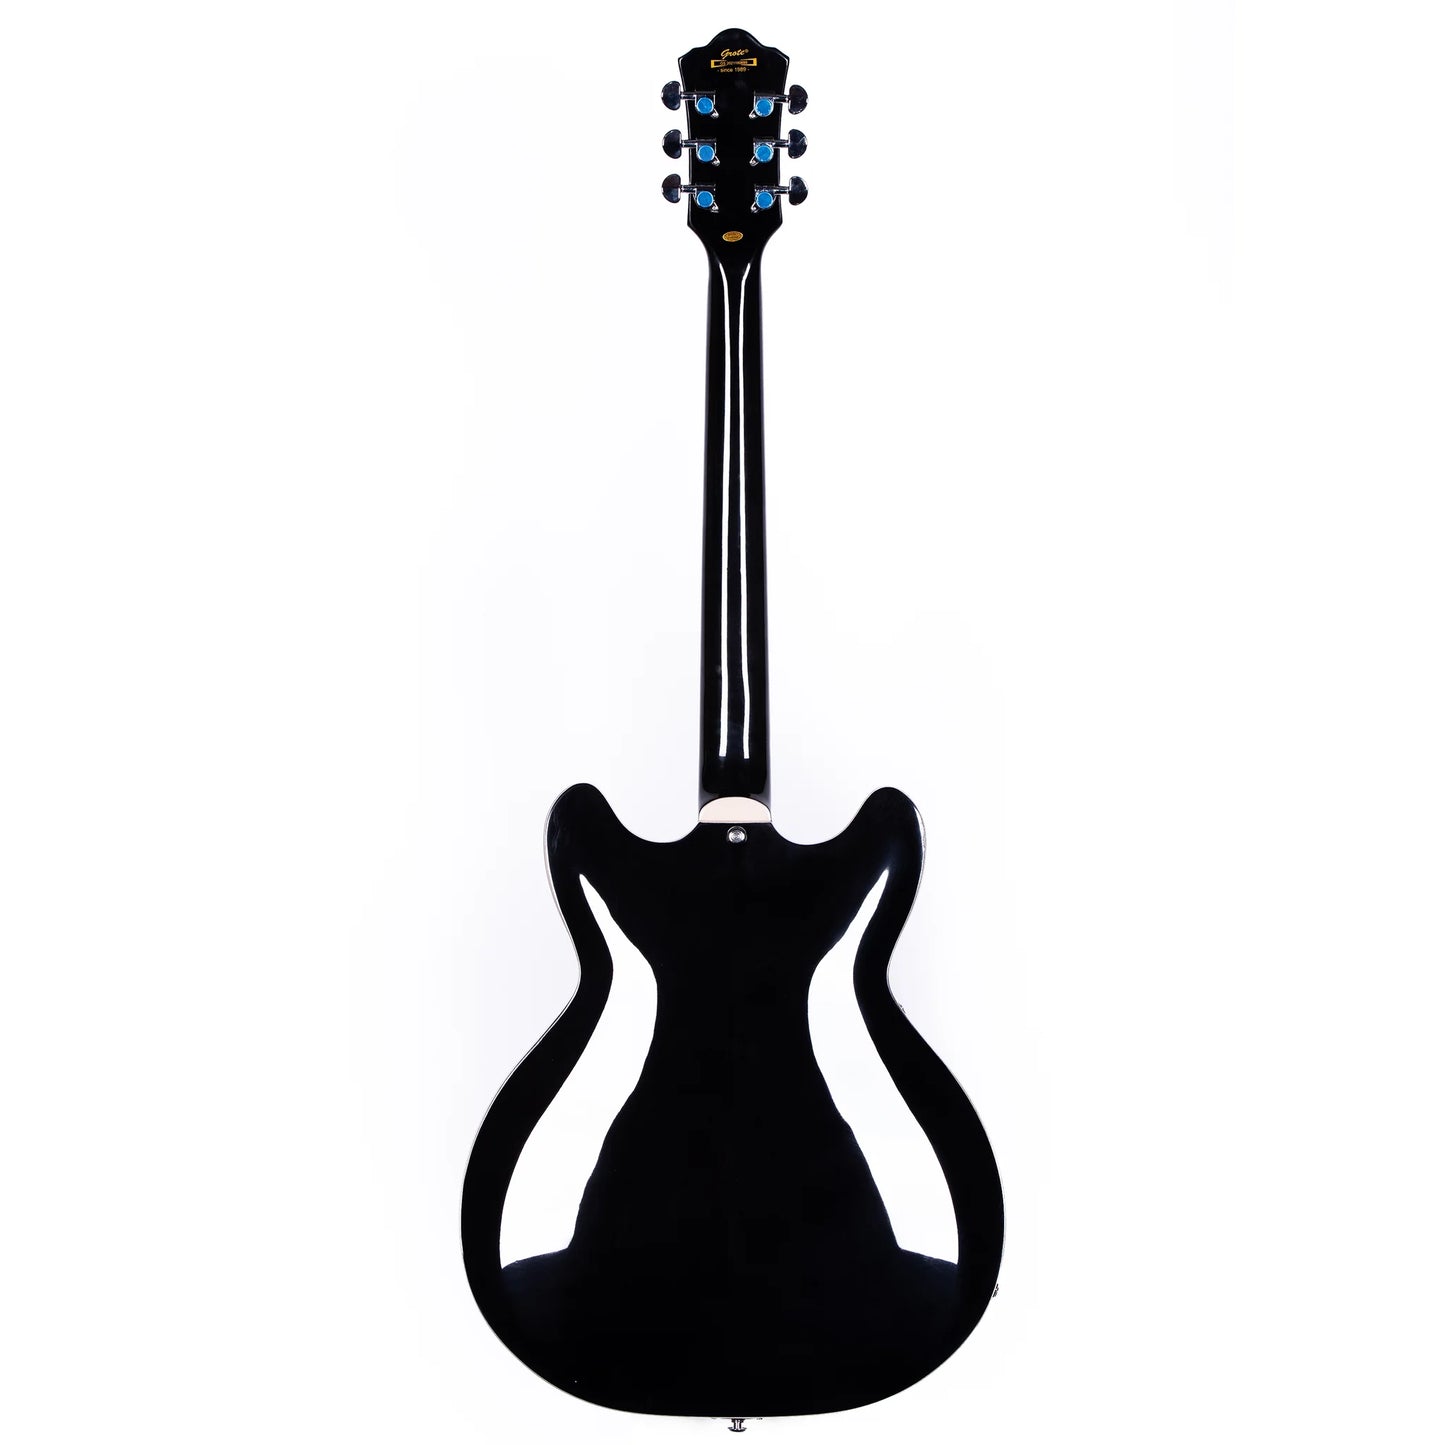 GROTE JAZZ LEFT-HANDED ELECTRIC GUITAR SEMI-HOLLOW BODY TRAPEZE TAILPIECE BRIDGE GUITAR GIG BAG